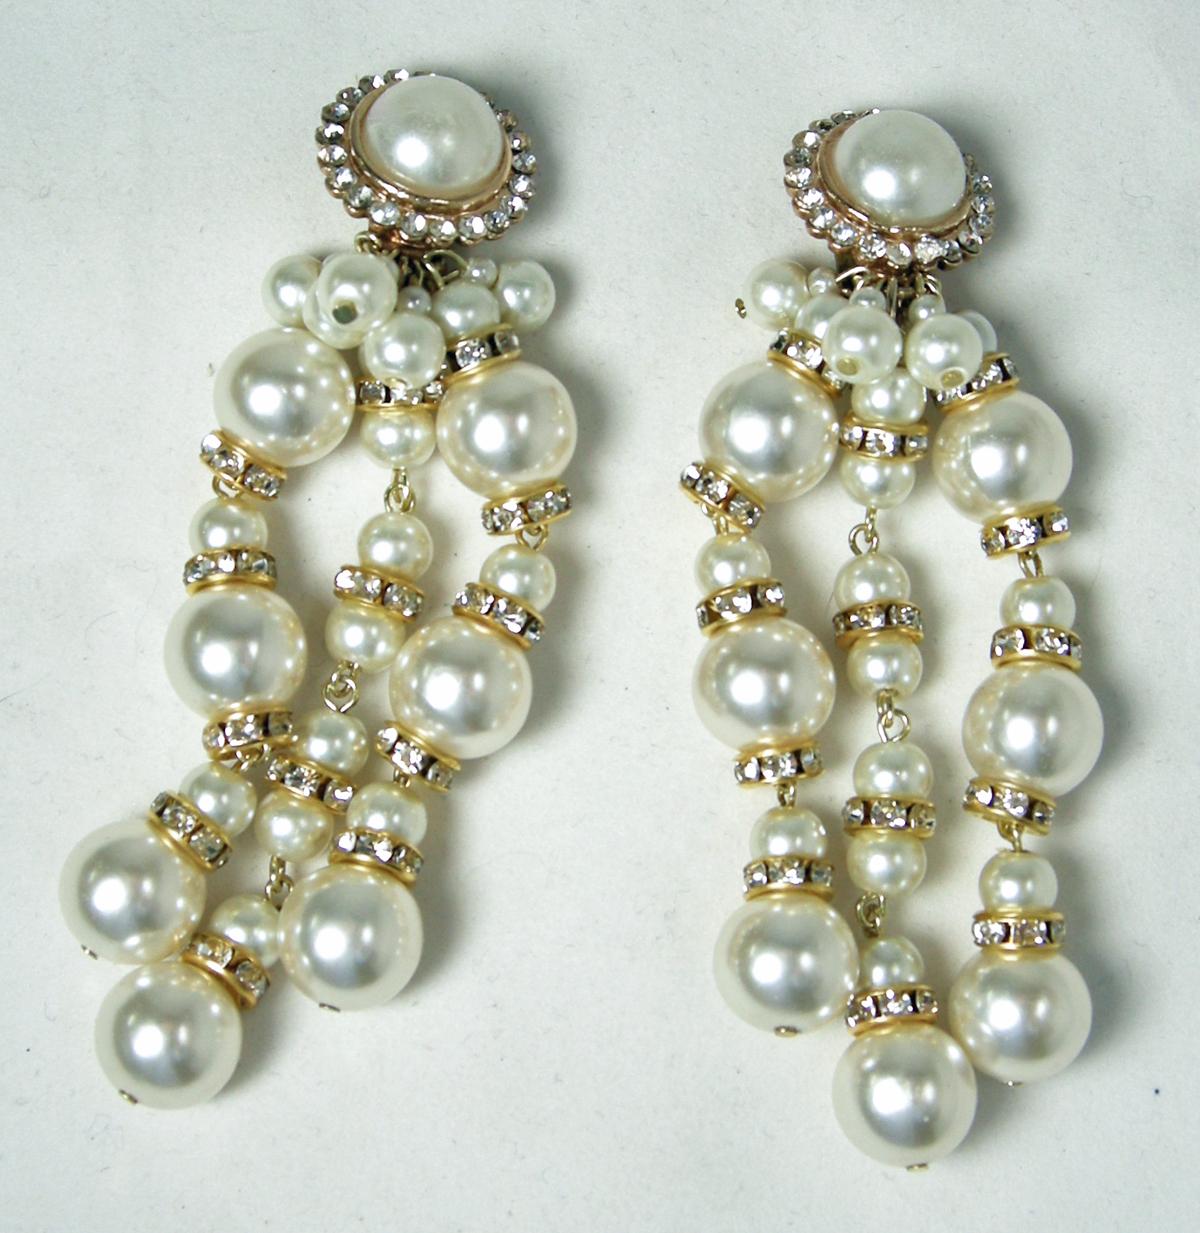 These long signed De Mario earrings have a top pearl center surrounded by crystals. The long drop has rows of faux pearls with clear crystal accents … in a gold tone setting.  In excellent condition, these clip earrings measure 3” x 1-1/4” and are